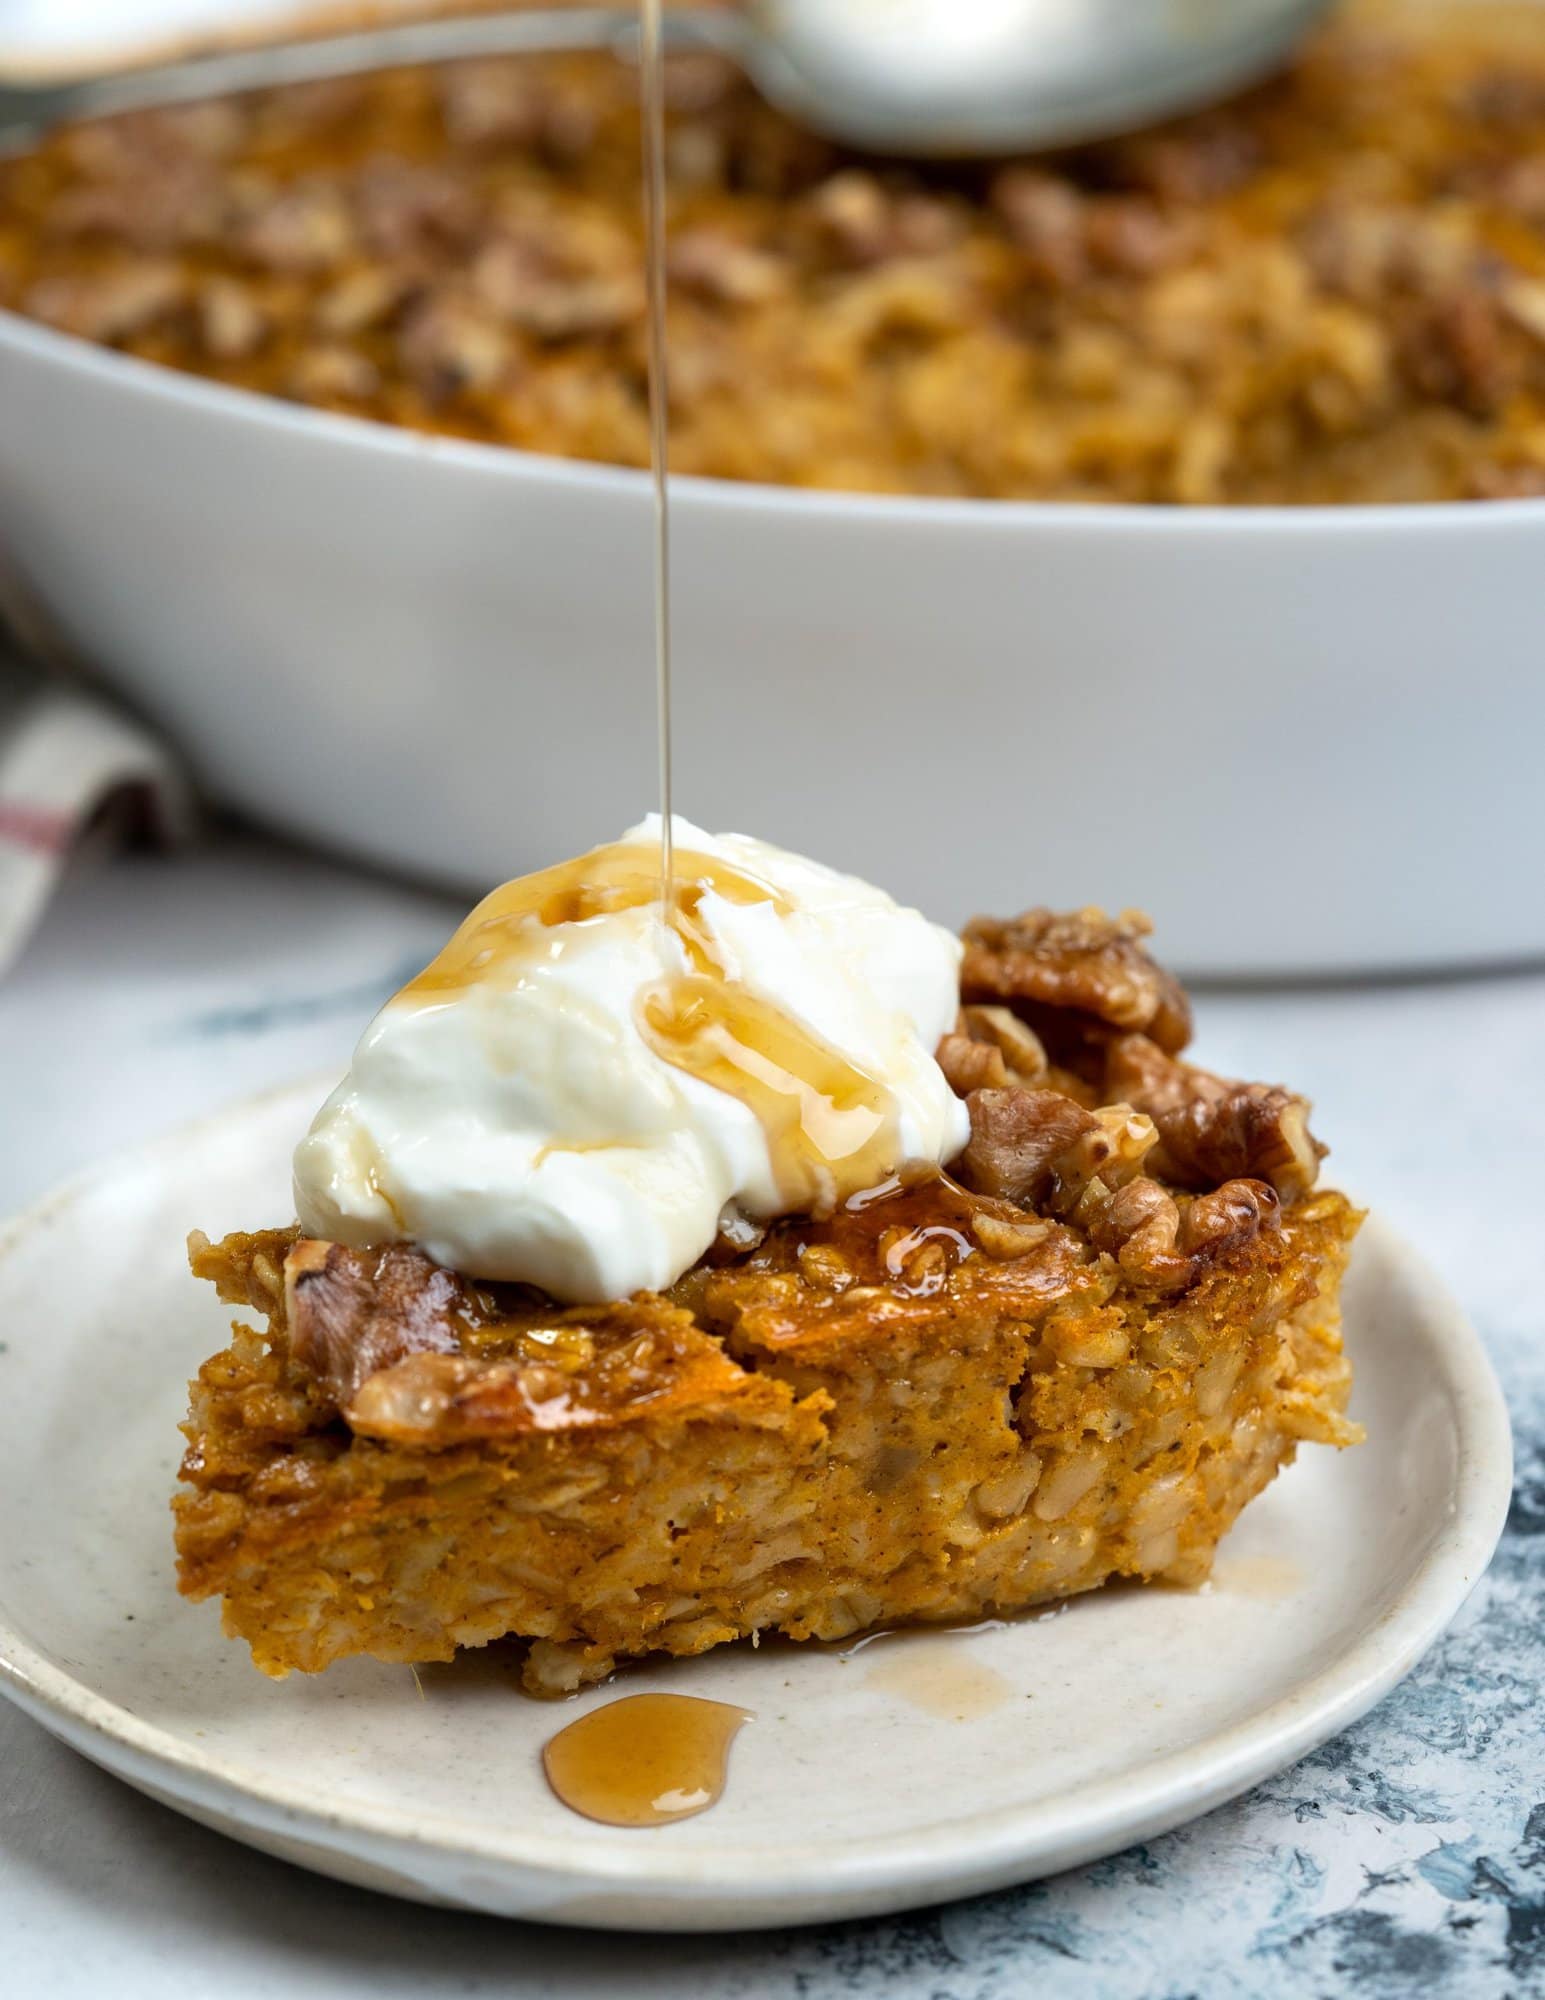 Pumpkin Baked Oatmeal - The flavours of kitchen